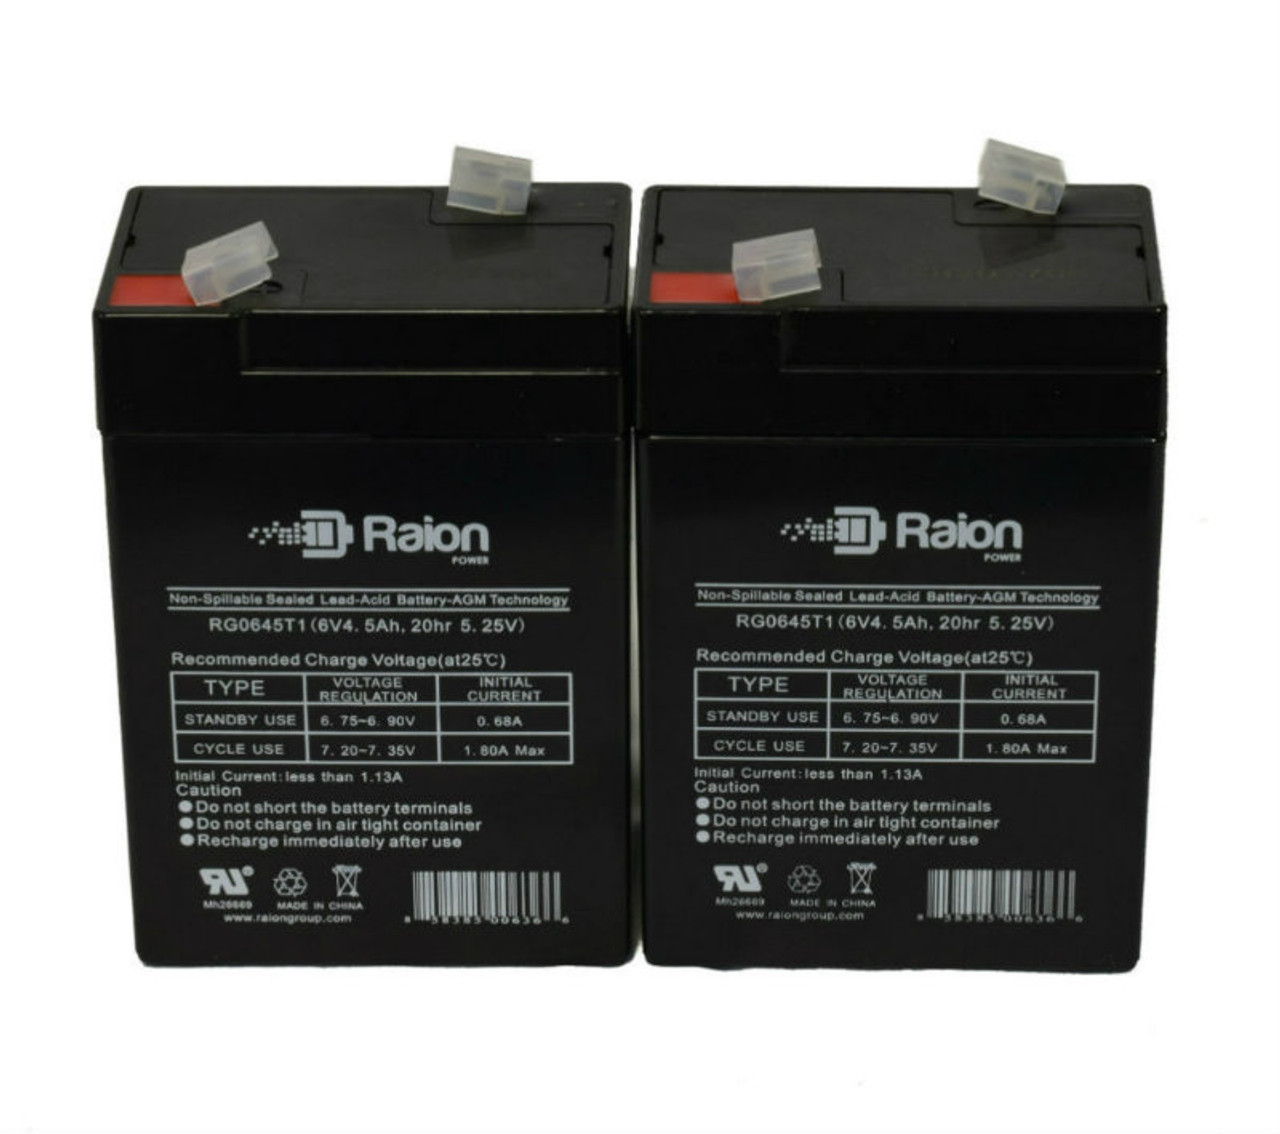 Raion Power 6 Volt 4.5Ah RG0645T1 Replacement Battery for GP GB4.5-6 - 2 Pack